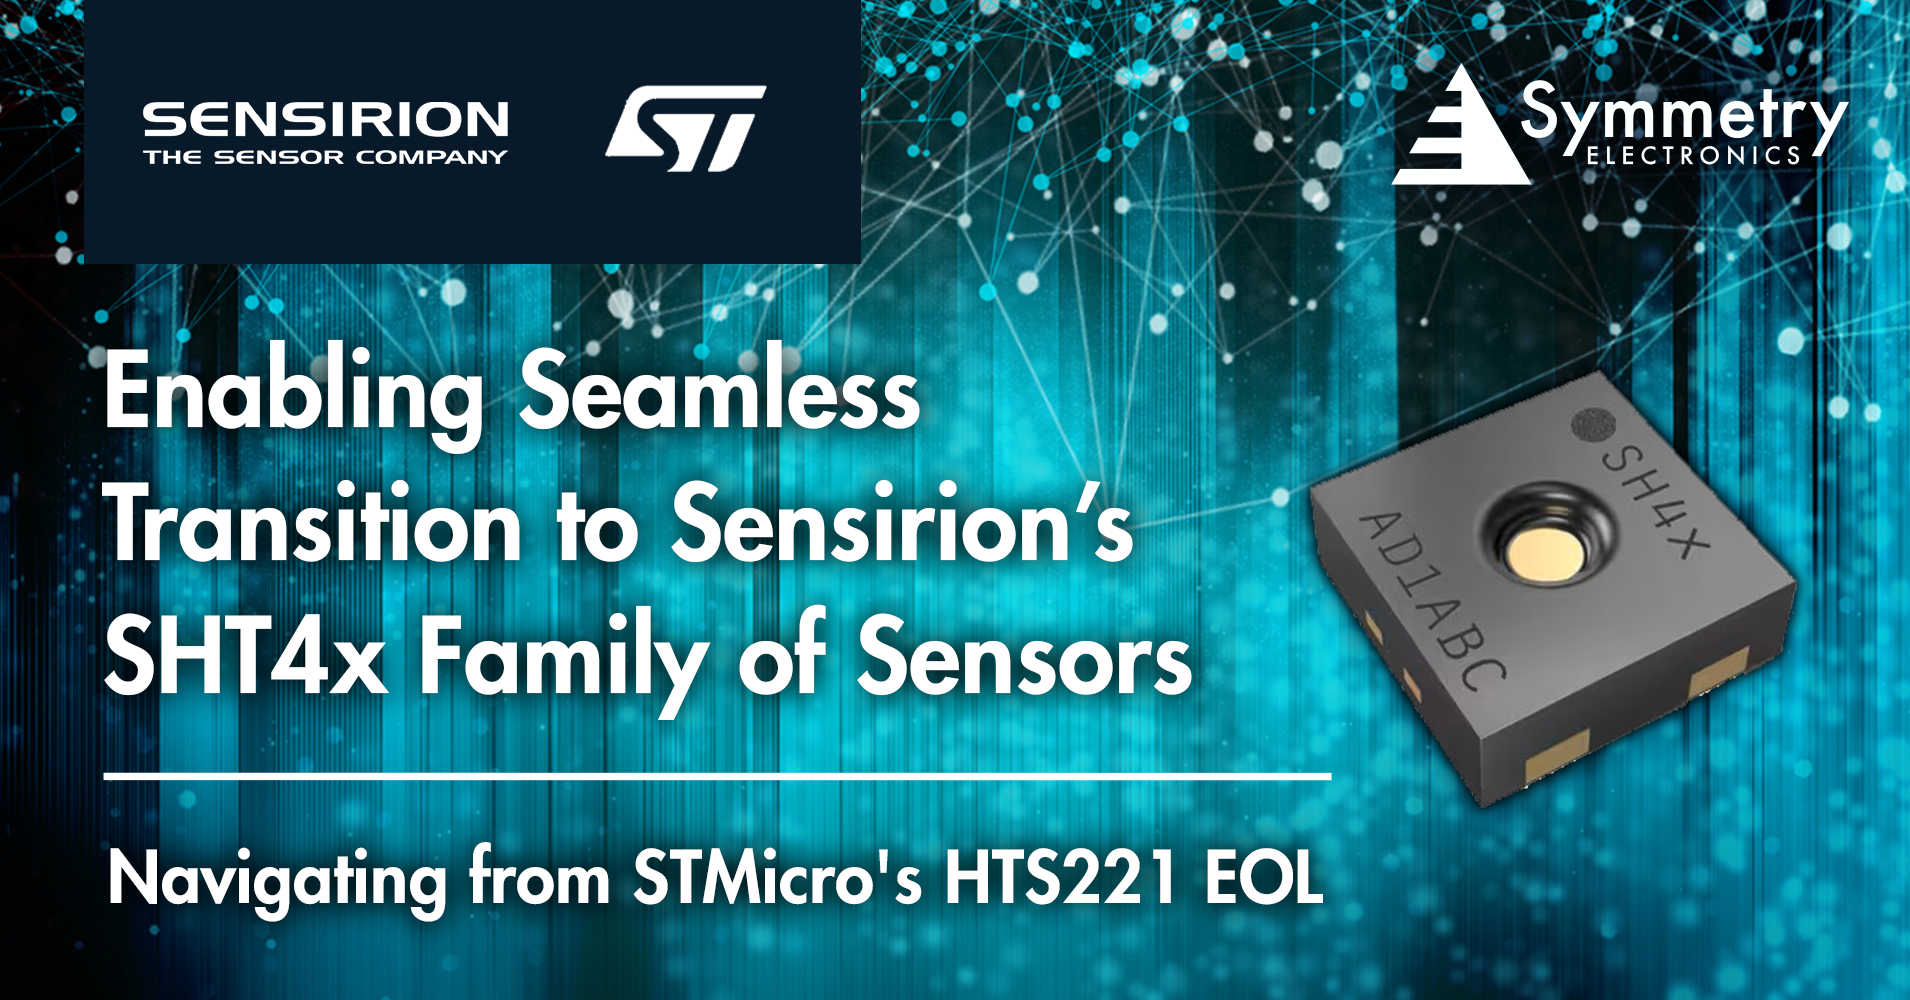 Sensirion's SHT4x family of sensors are available at Symmetry Electronics now to enable a seamless transition from STMicro's HTS221 end of life. 